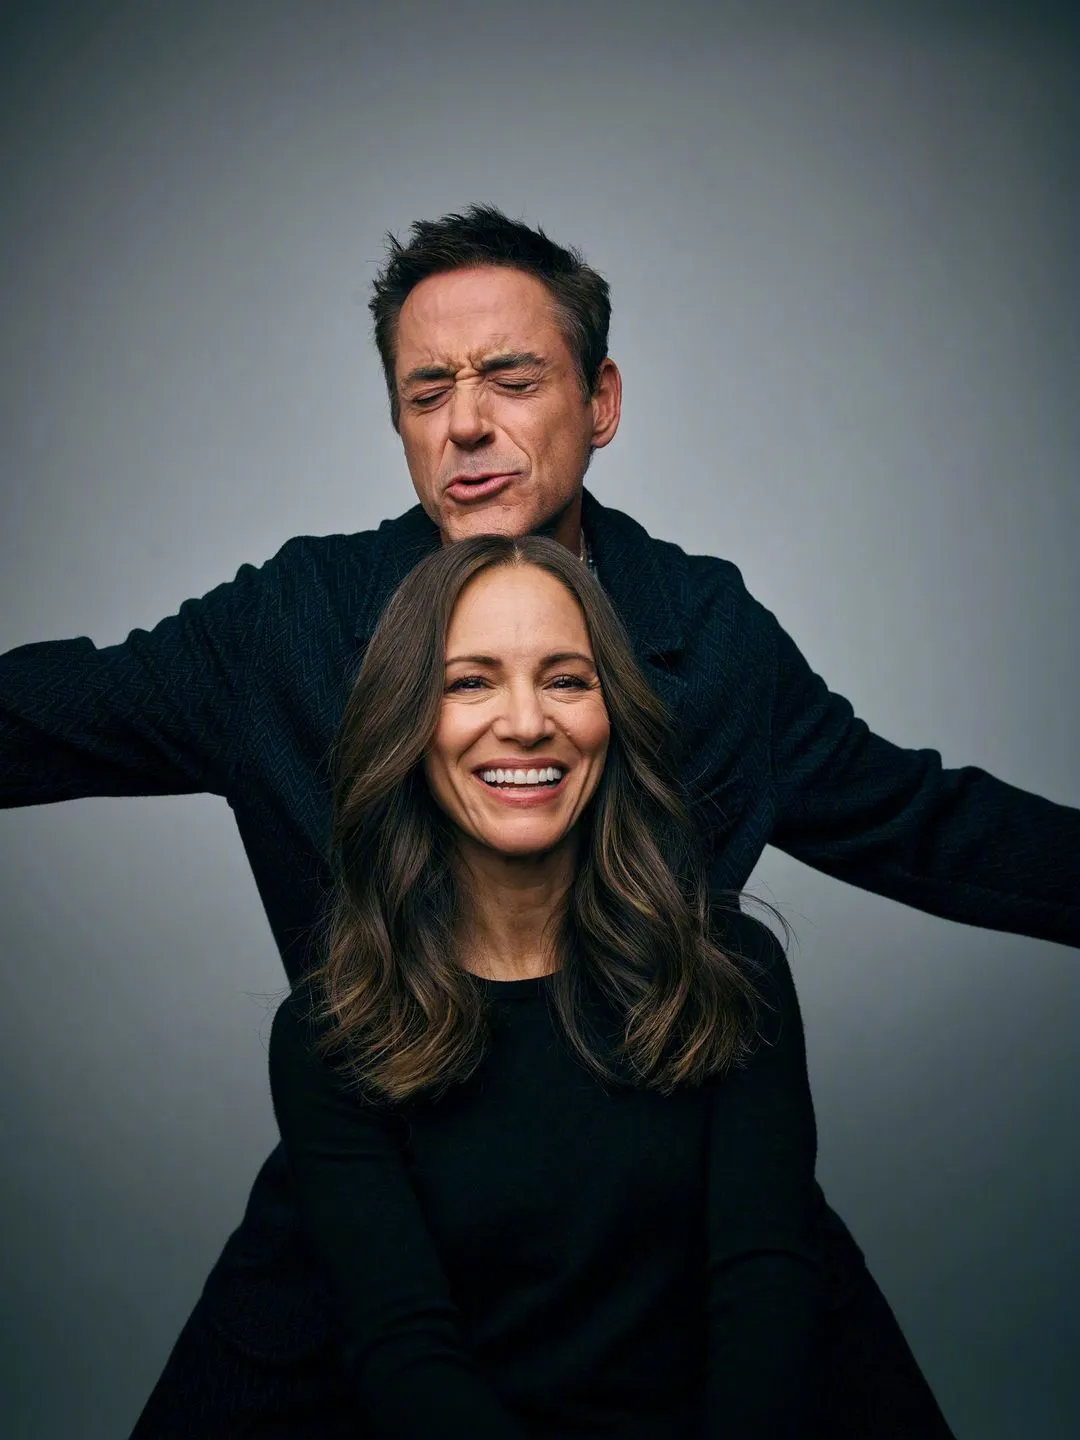 Valentine's Day Photoshoot of Robert Downey Jr. and Susan Downey | FMV6